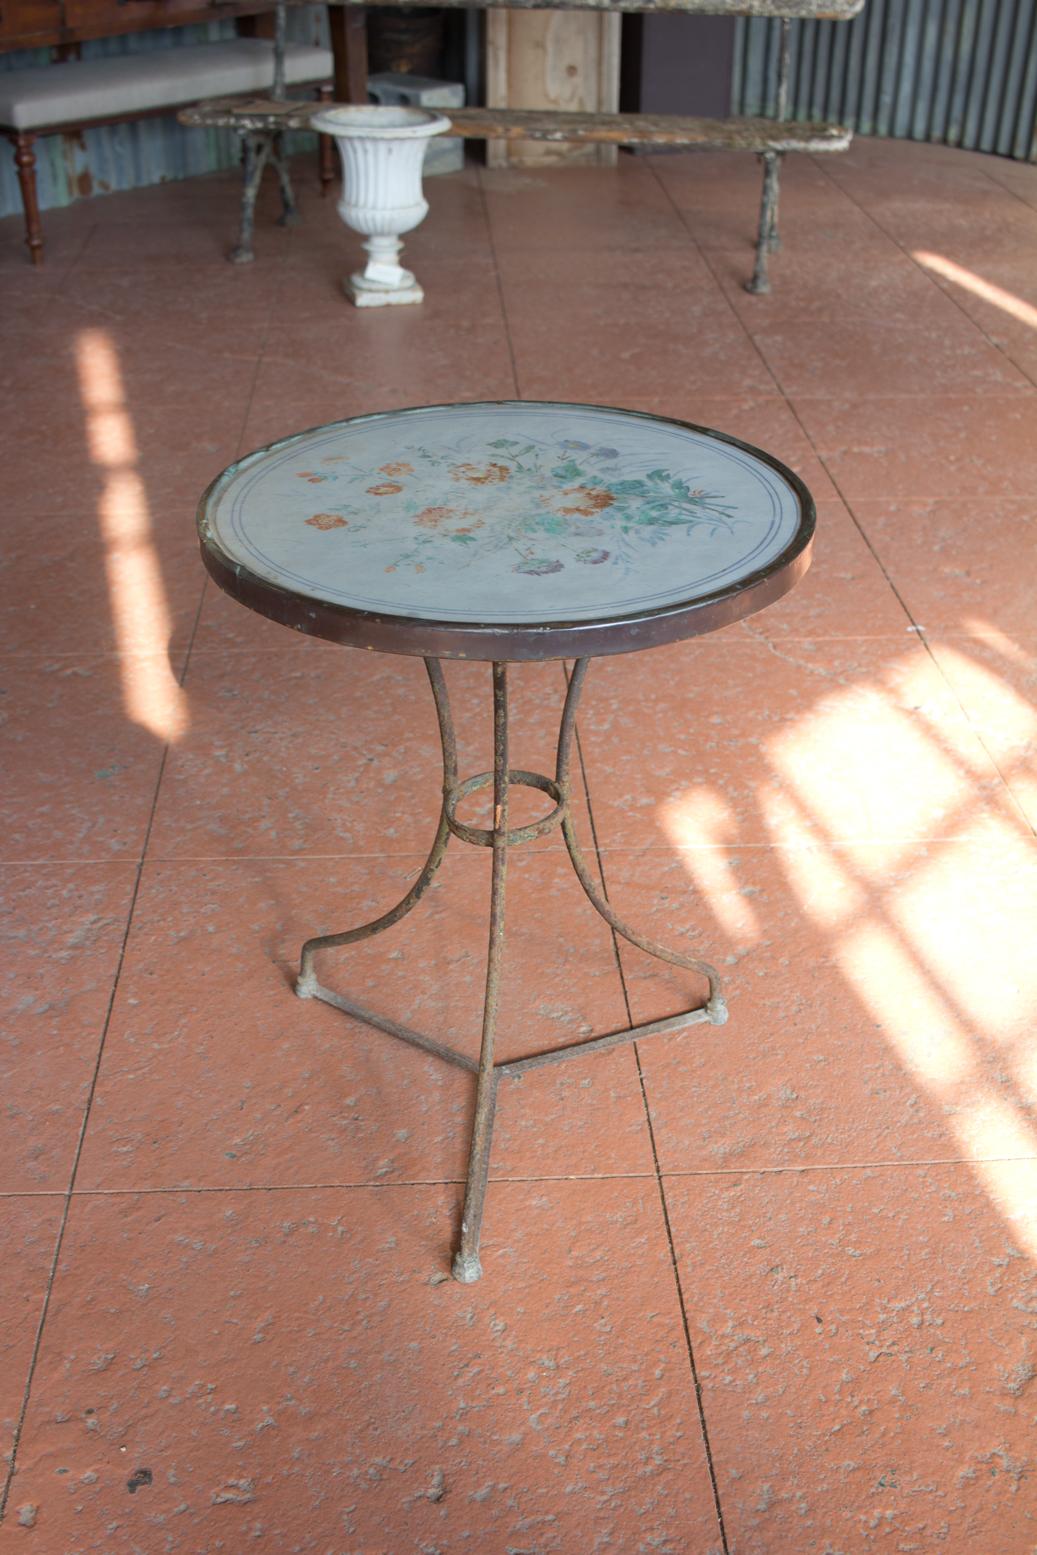 Unusual antique French bistro table with a hand-painted ceramic top that is beautifully faded with age. The top is set in a copper band, on a wrought iron tripod base.